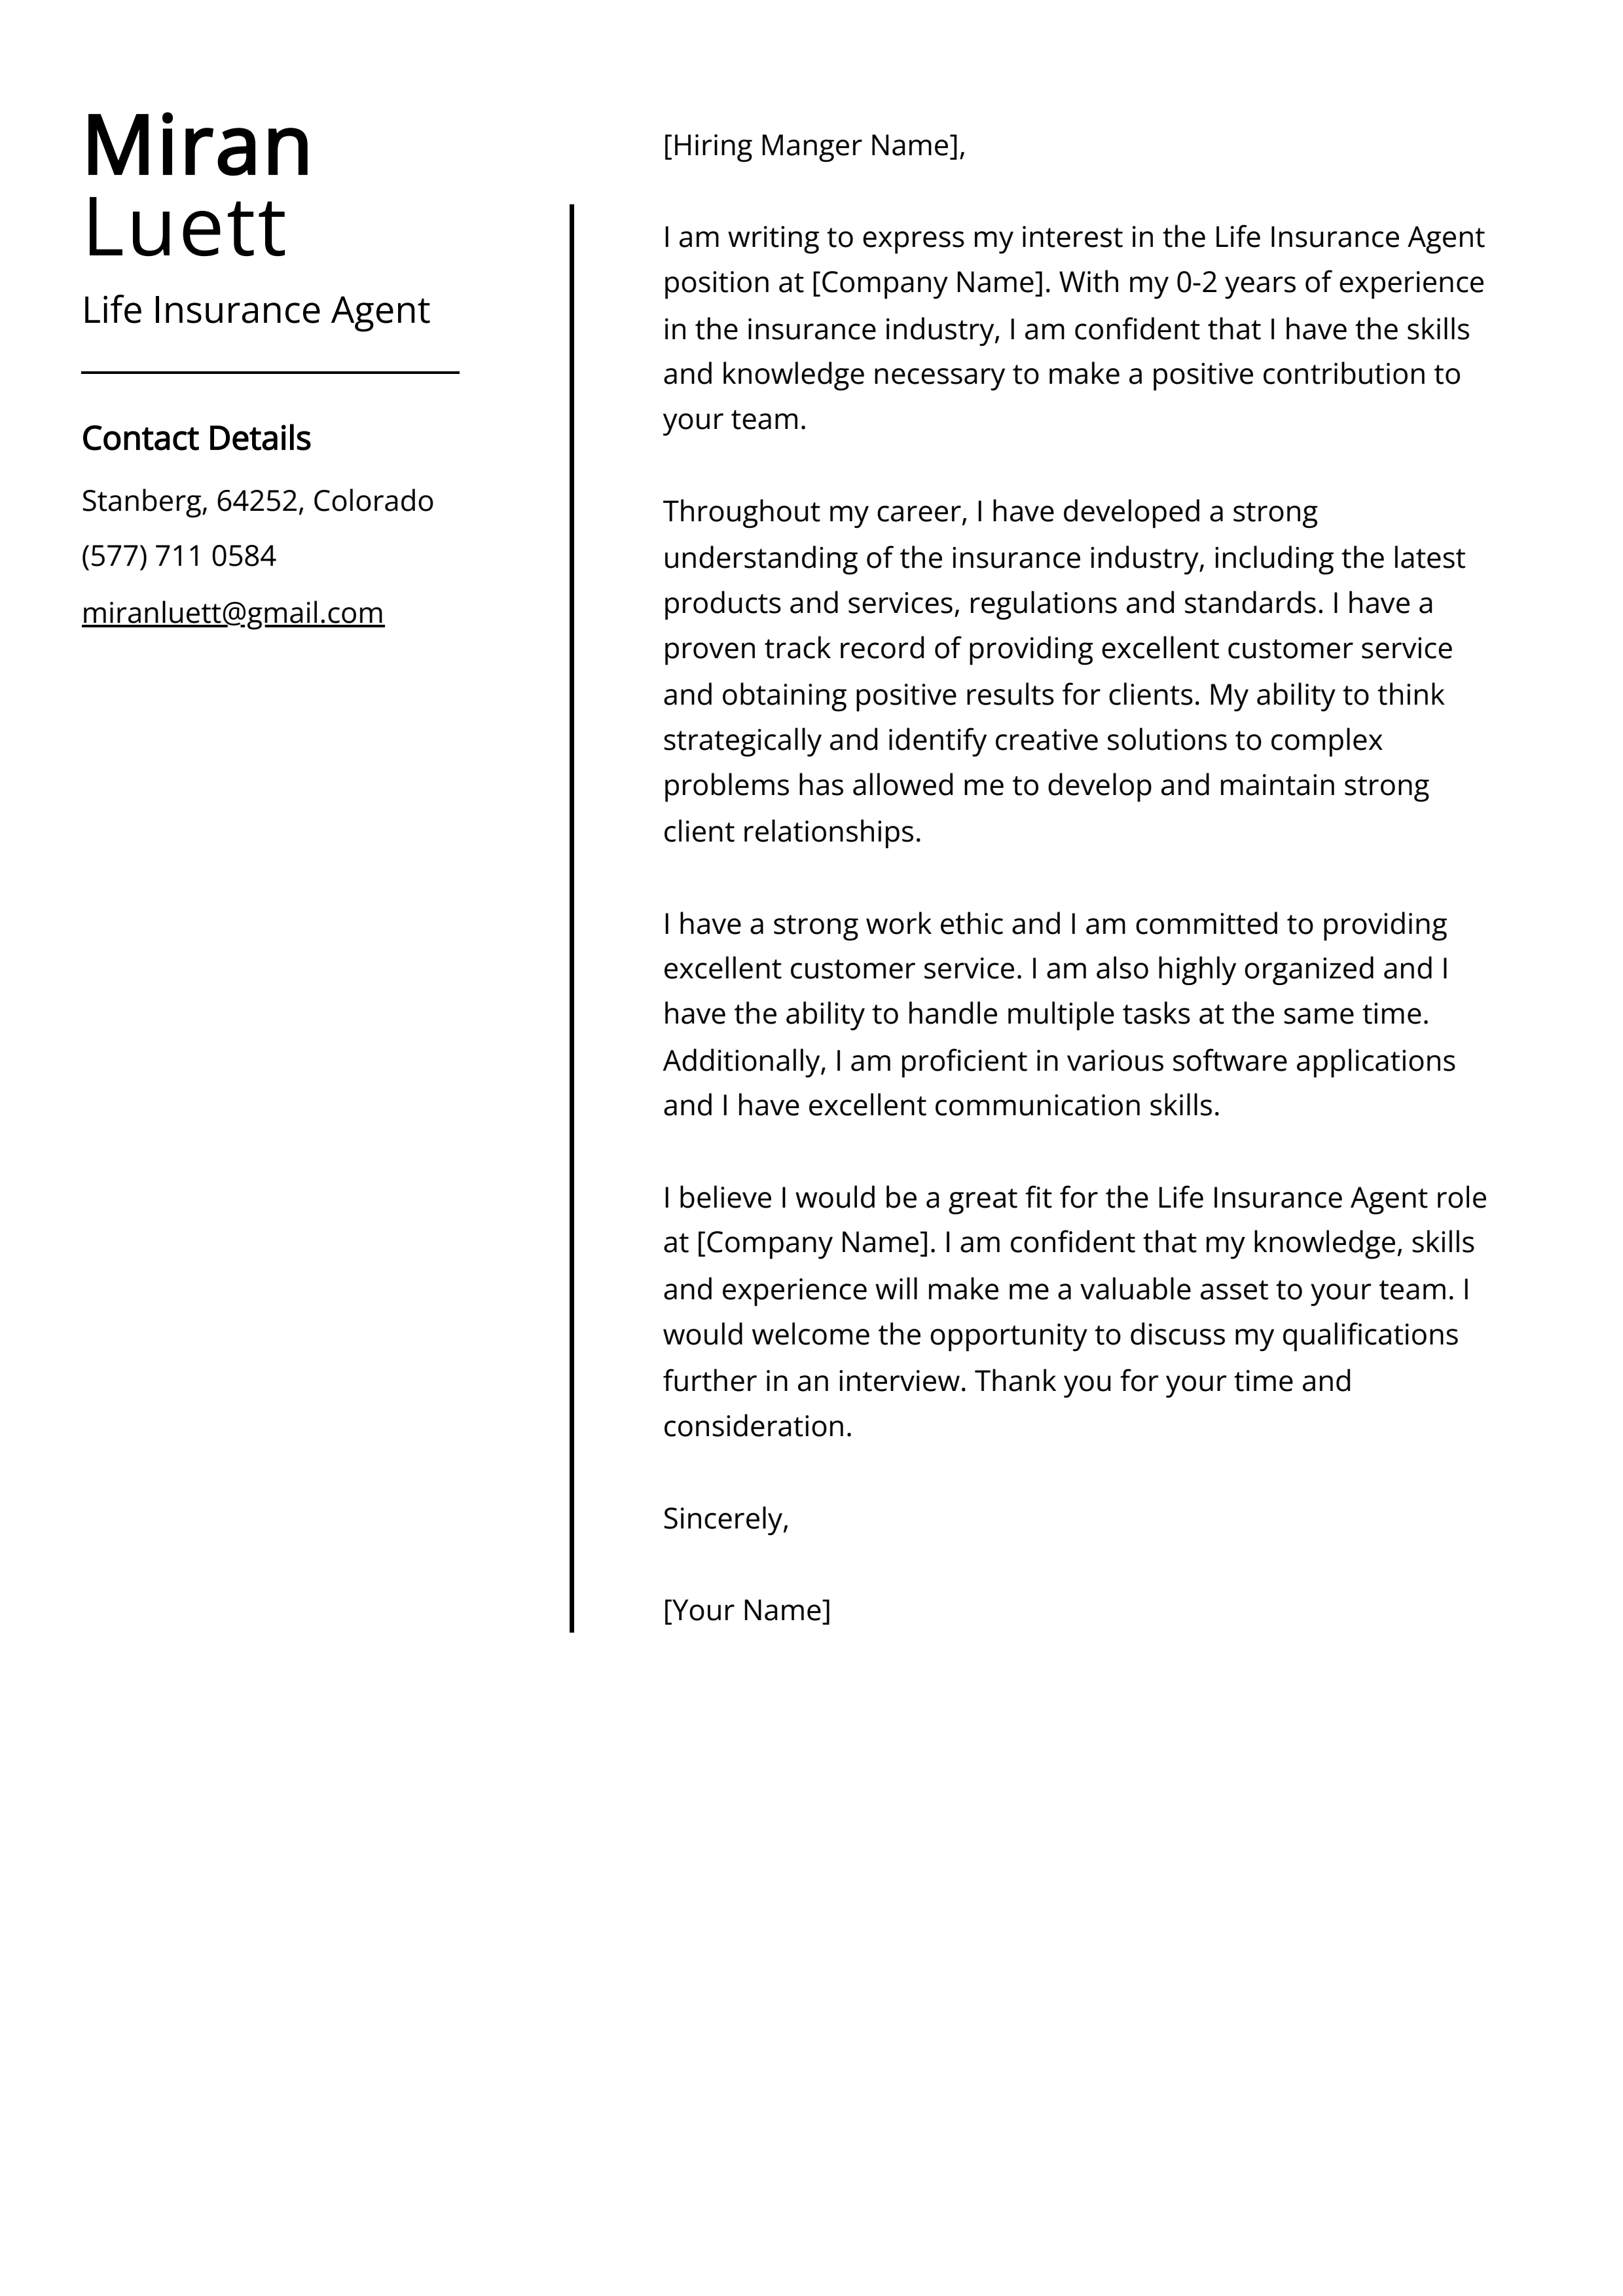 Life Insurance Agent Cover Letter Example